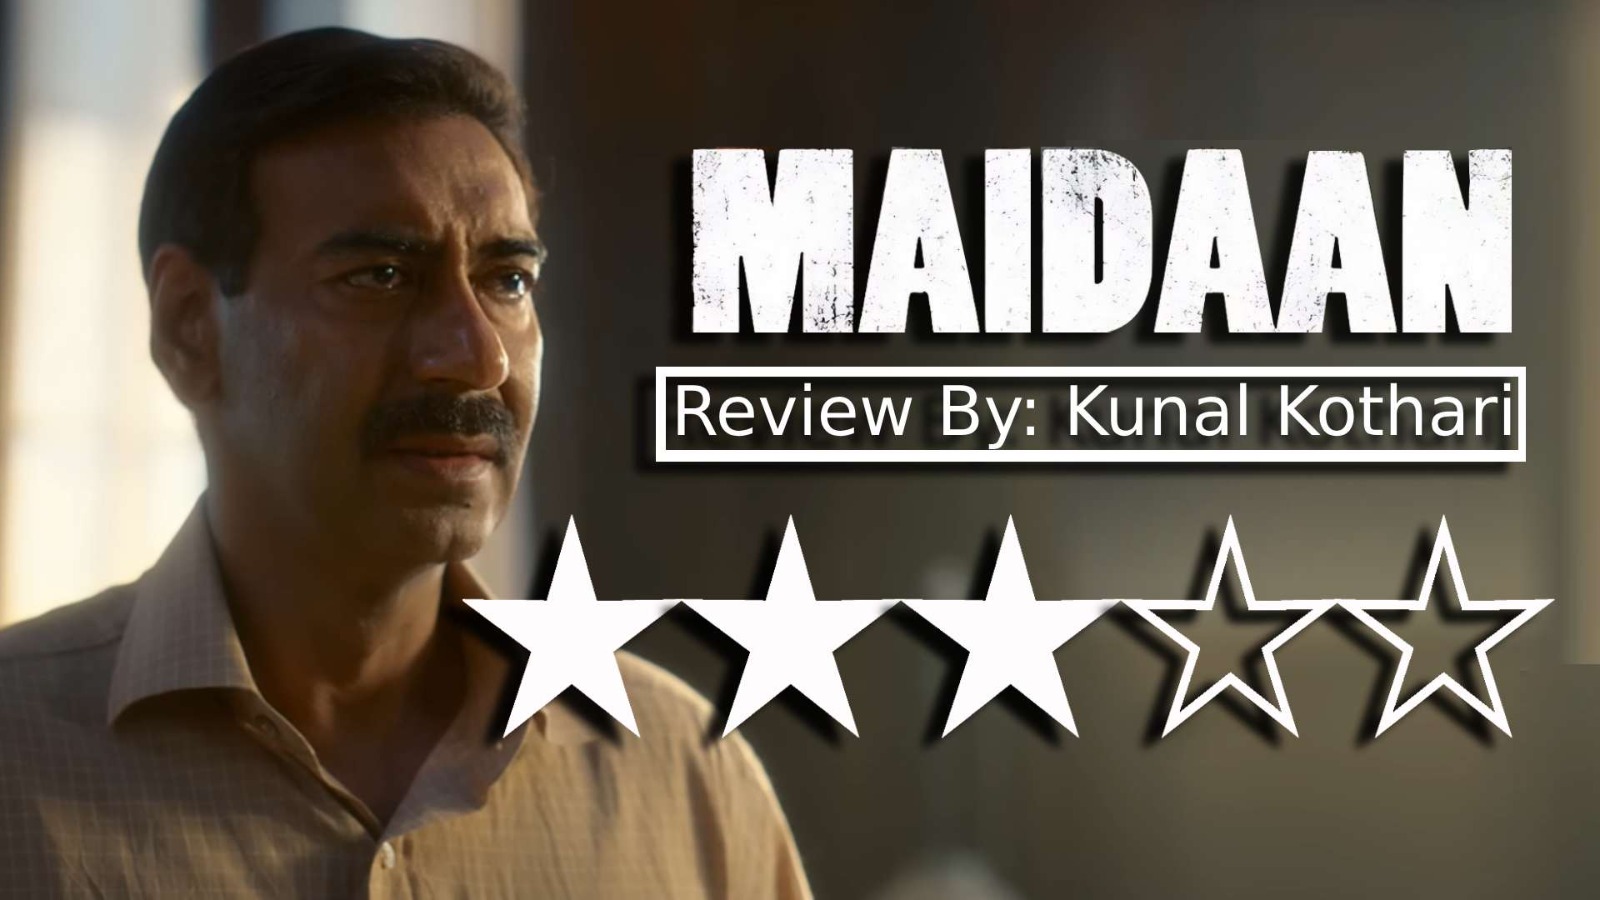 Review of 'Maidaan': Lands a rousing goal into the net with its sports portrayal but struggles with its characterisation and long runtime 890622